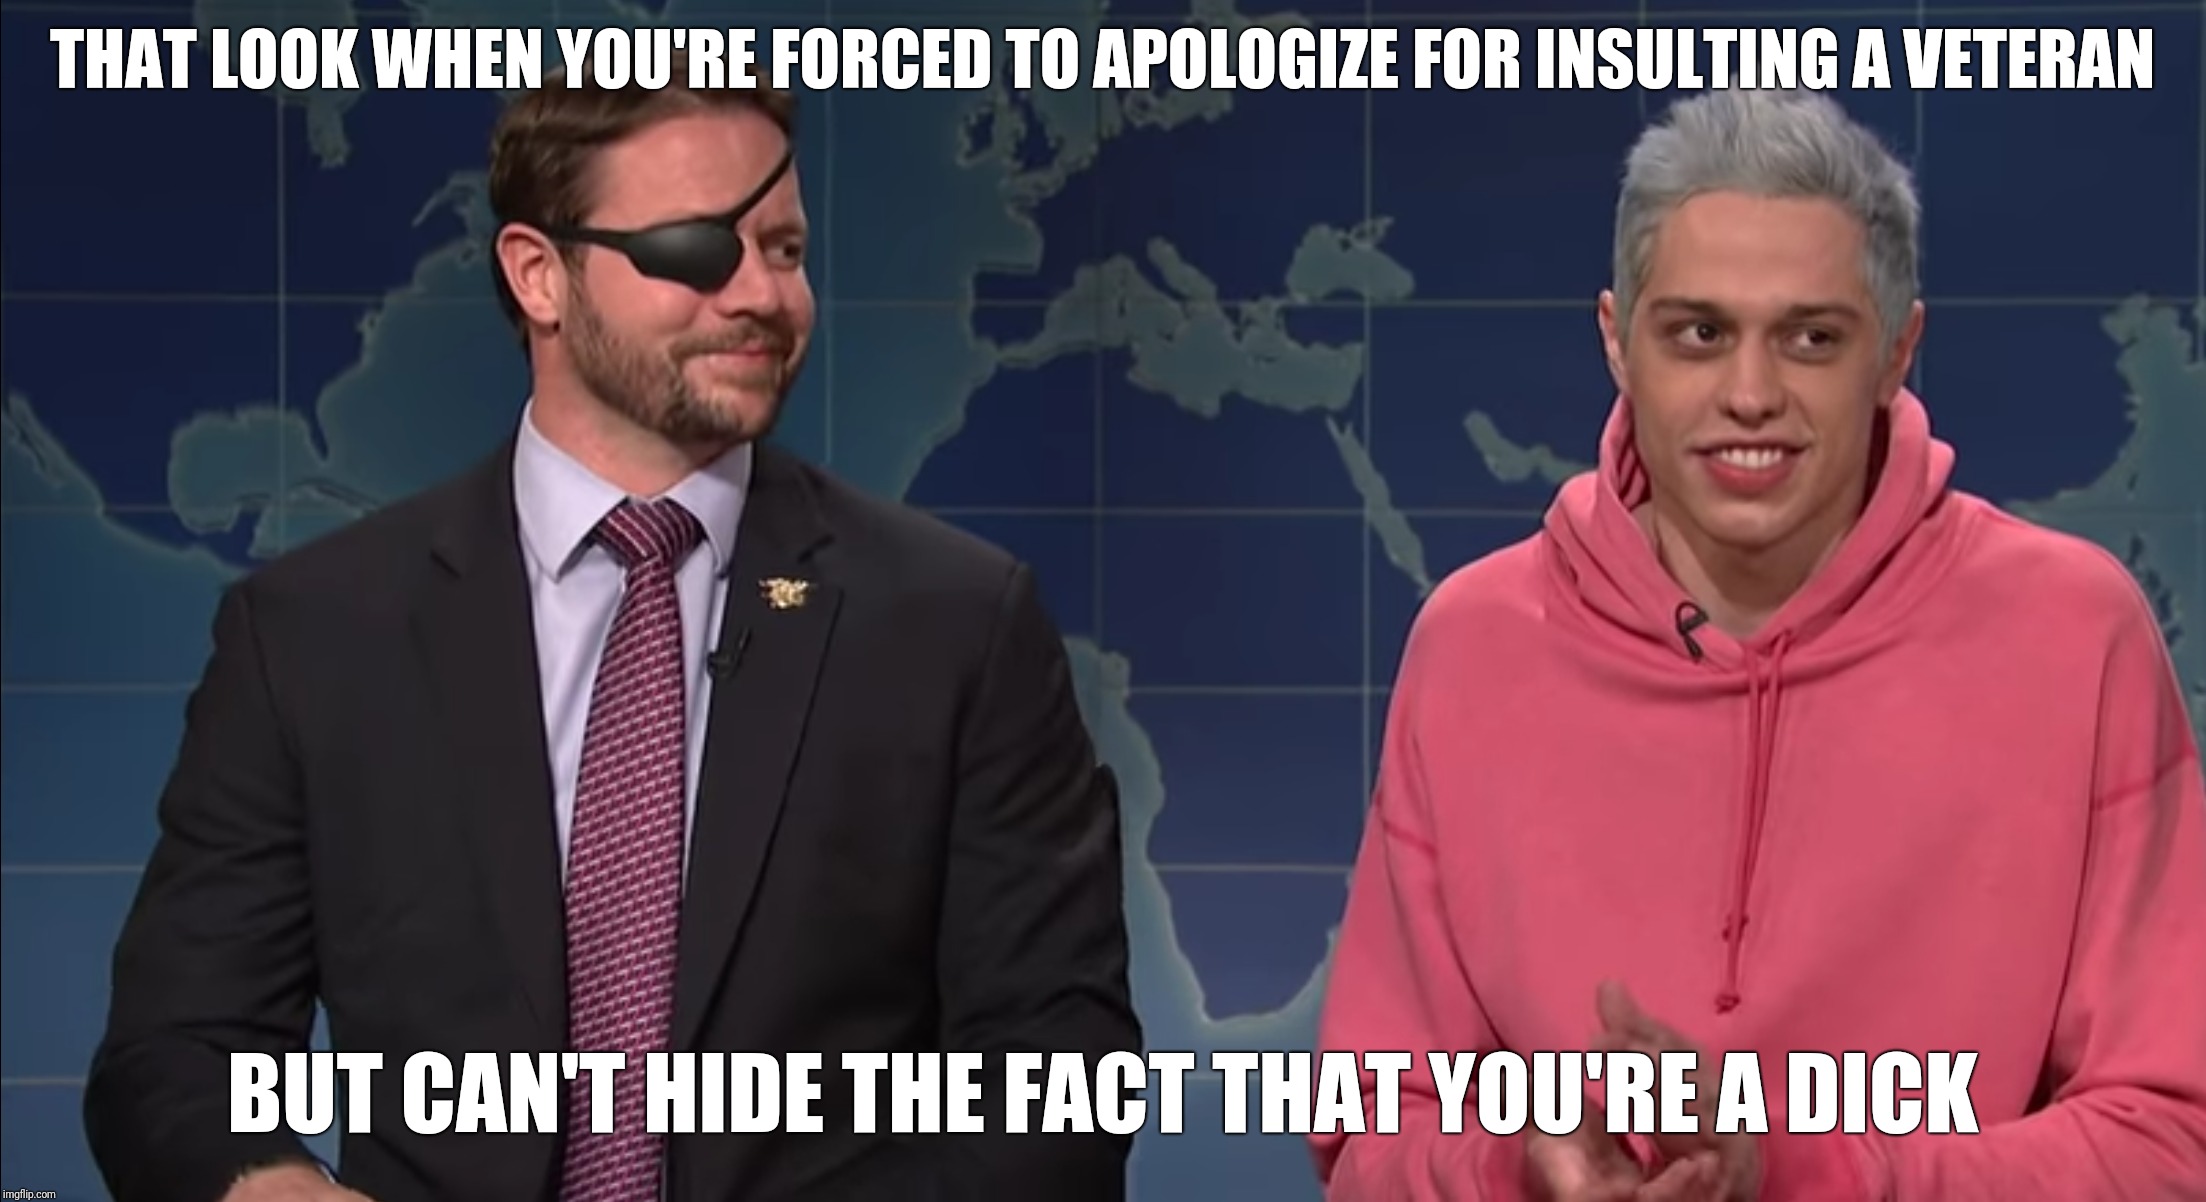 THAT LOOK WHEN YOU'RE FORCED TO APOLOGIZE FOR INSULTING A VETERAN; BUT CAN'T HIDE THE FACT THAT YOU'RE A DICK | image tagged in snl,saturday night live,fake apology,military,veteran,veterans day | made w/ Imgflip meme maker